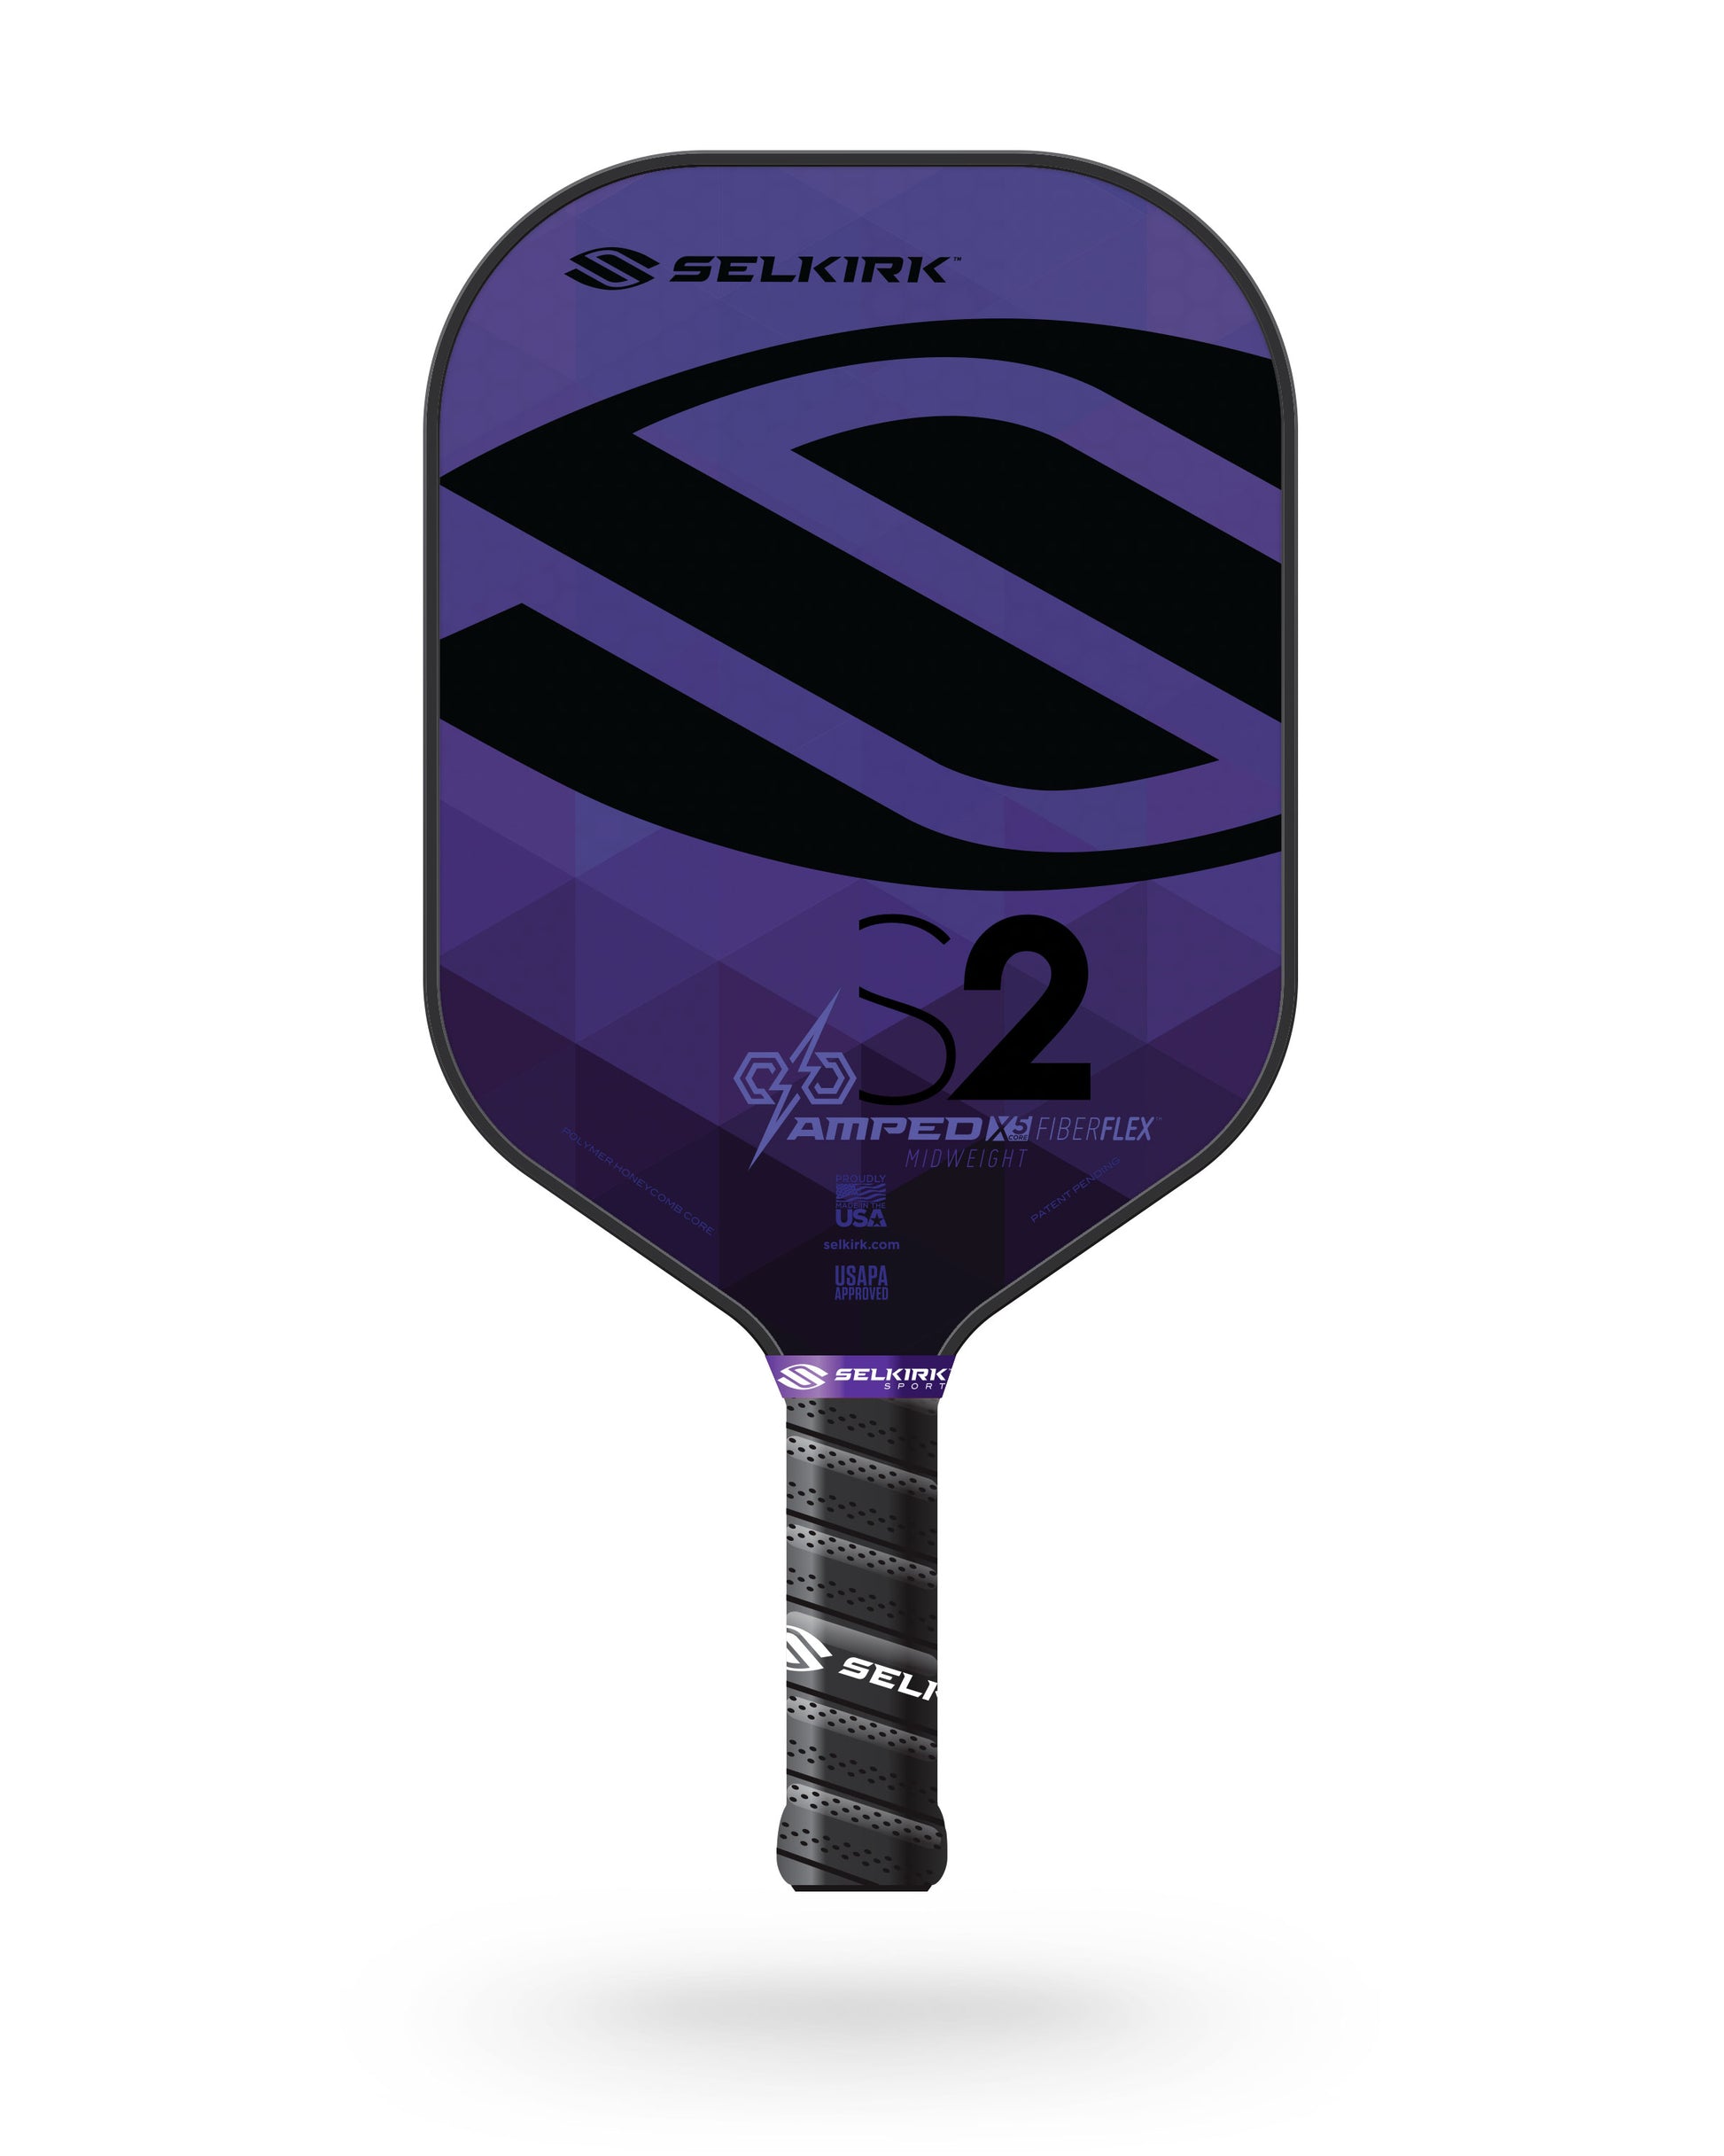 Selkirk AMPED S2 Pickleball Paddle in purple and black